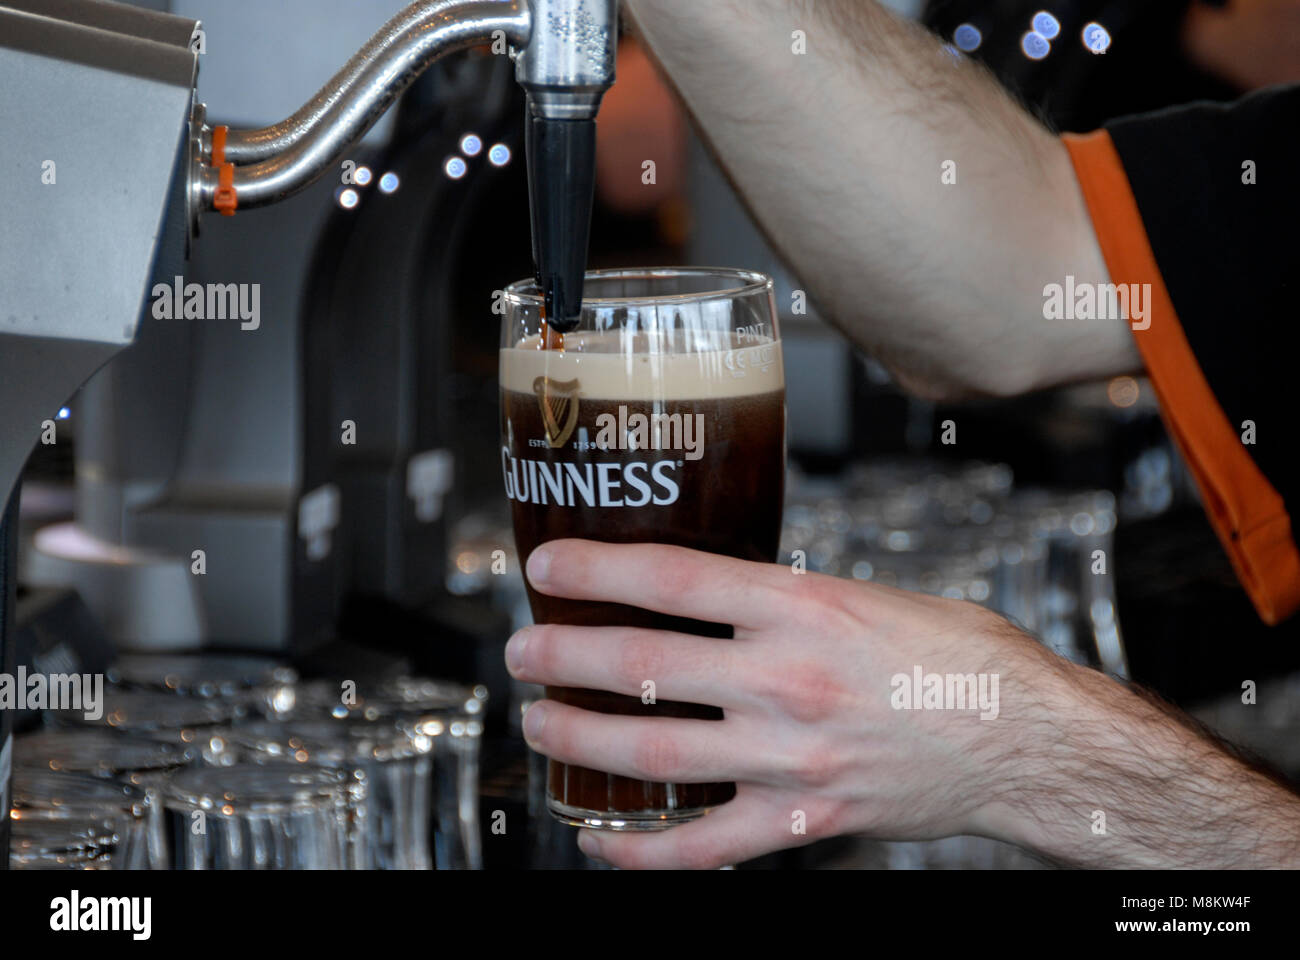 https://c8.alamy.com/comp/M8KW4F/a-pint-of-guinness-being-poured-into-a-pint-glass-at-the-gravity-bar-M8KW4F.jpg